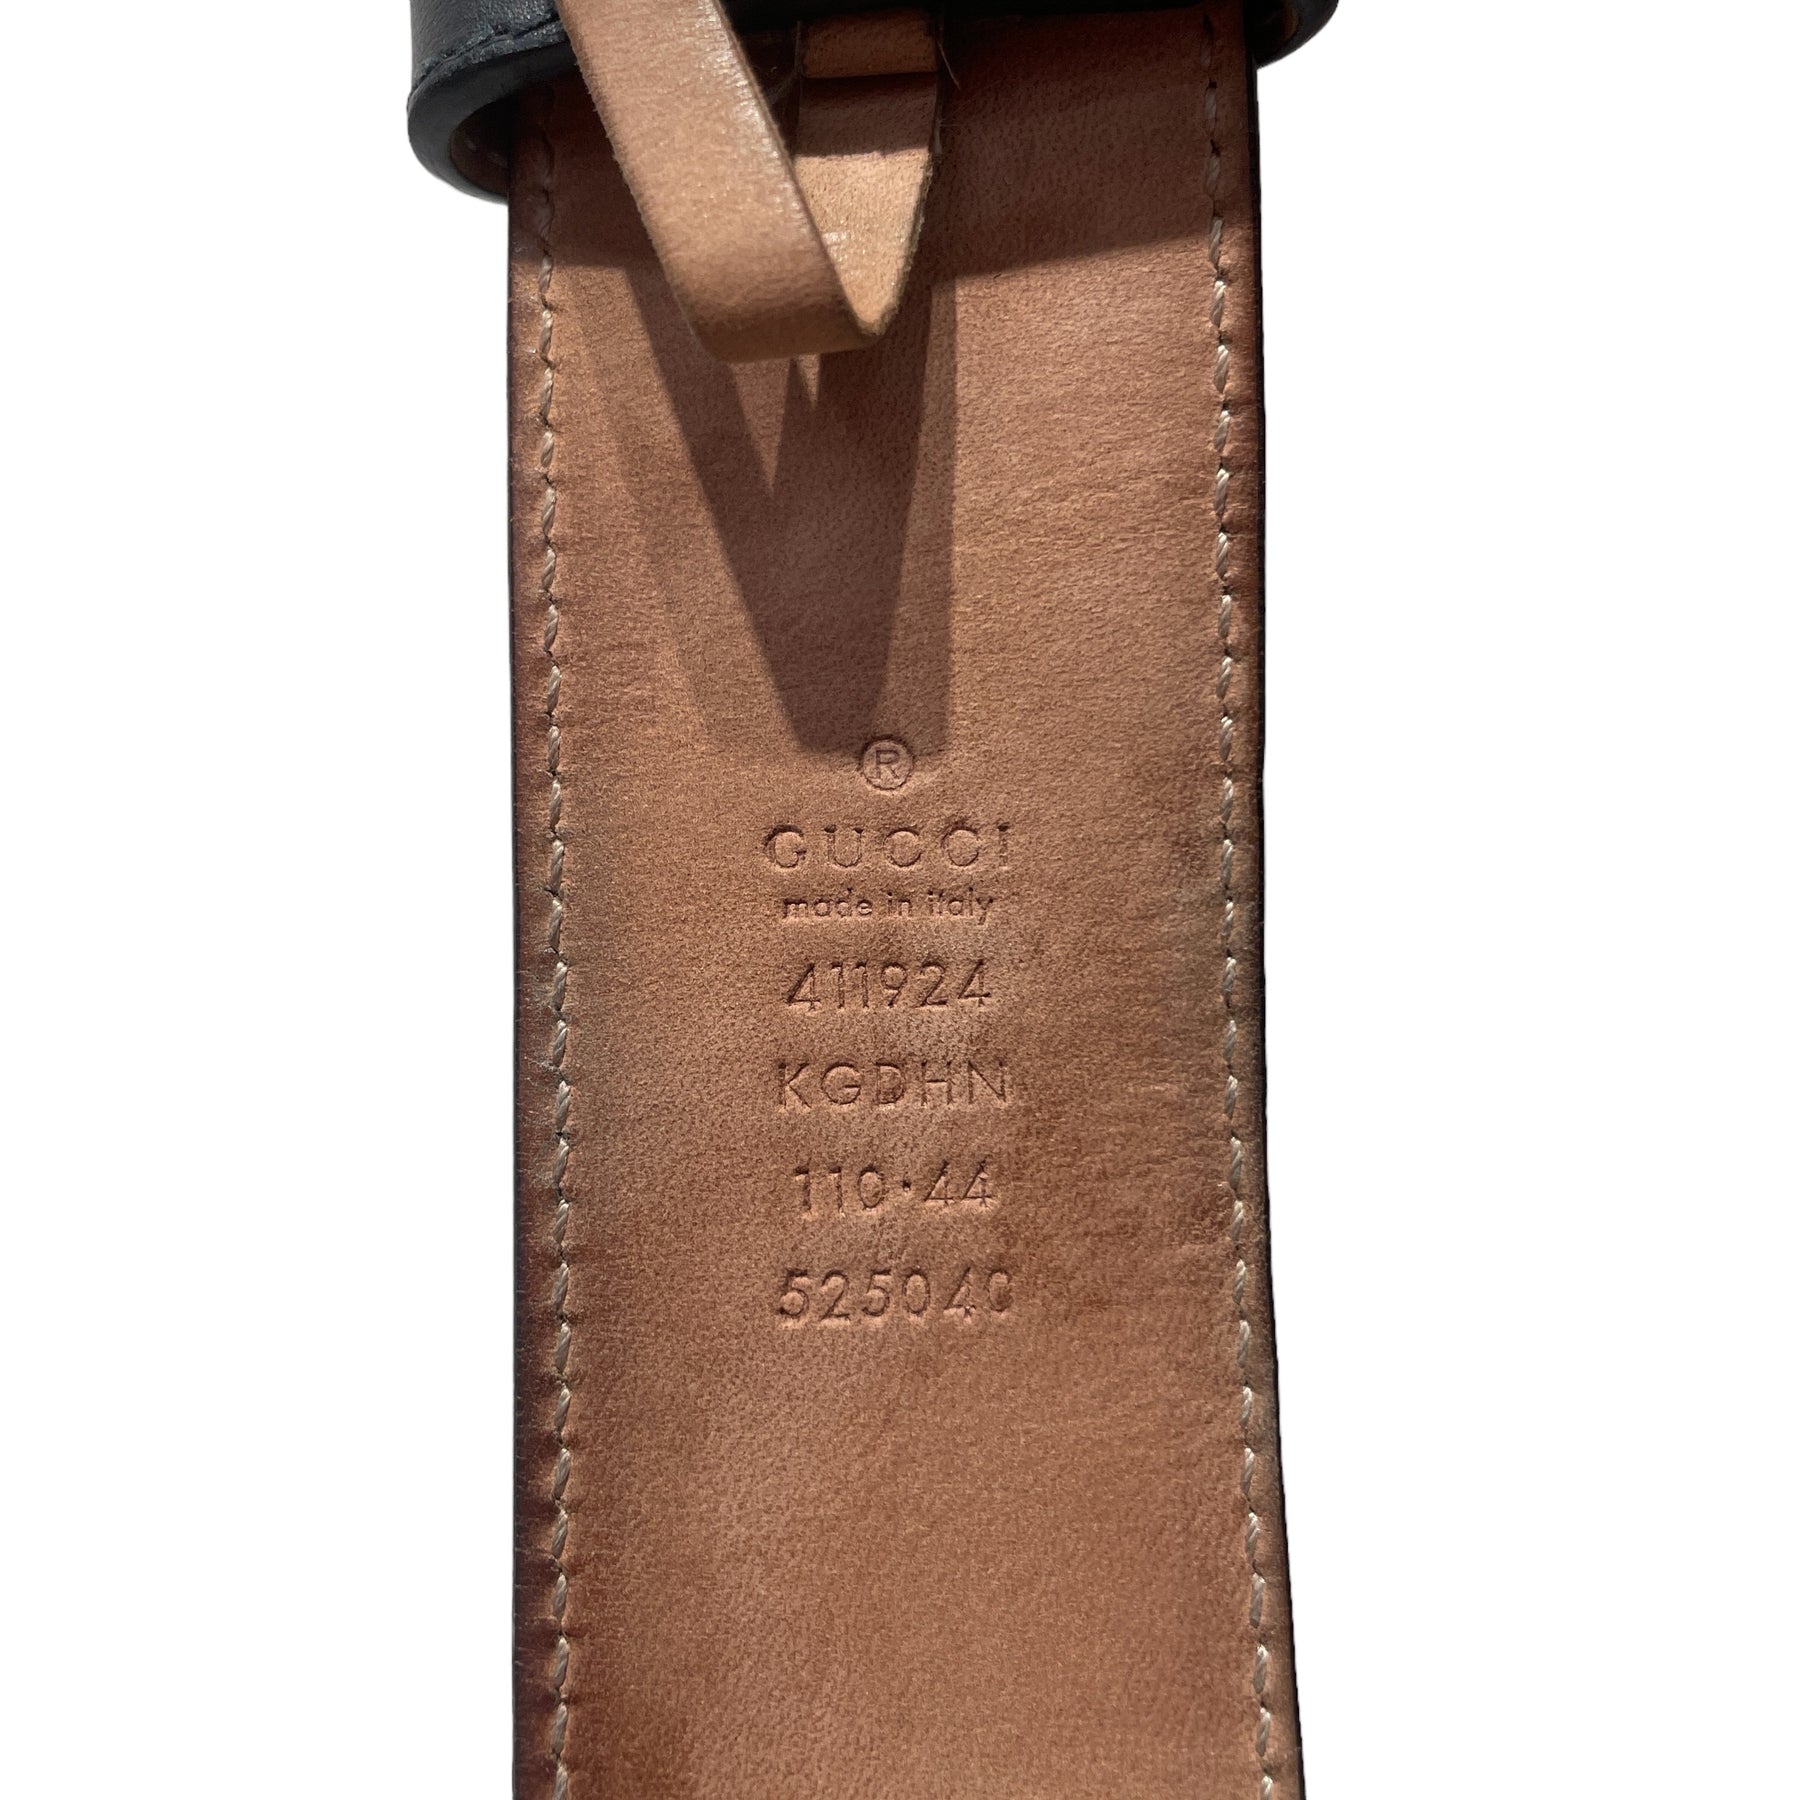 GUCCI Brown Leather Belt Size 110/44 525040 Made In Italy